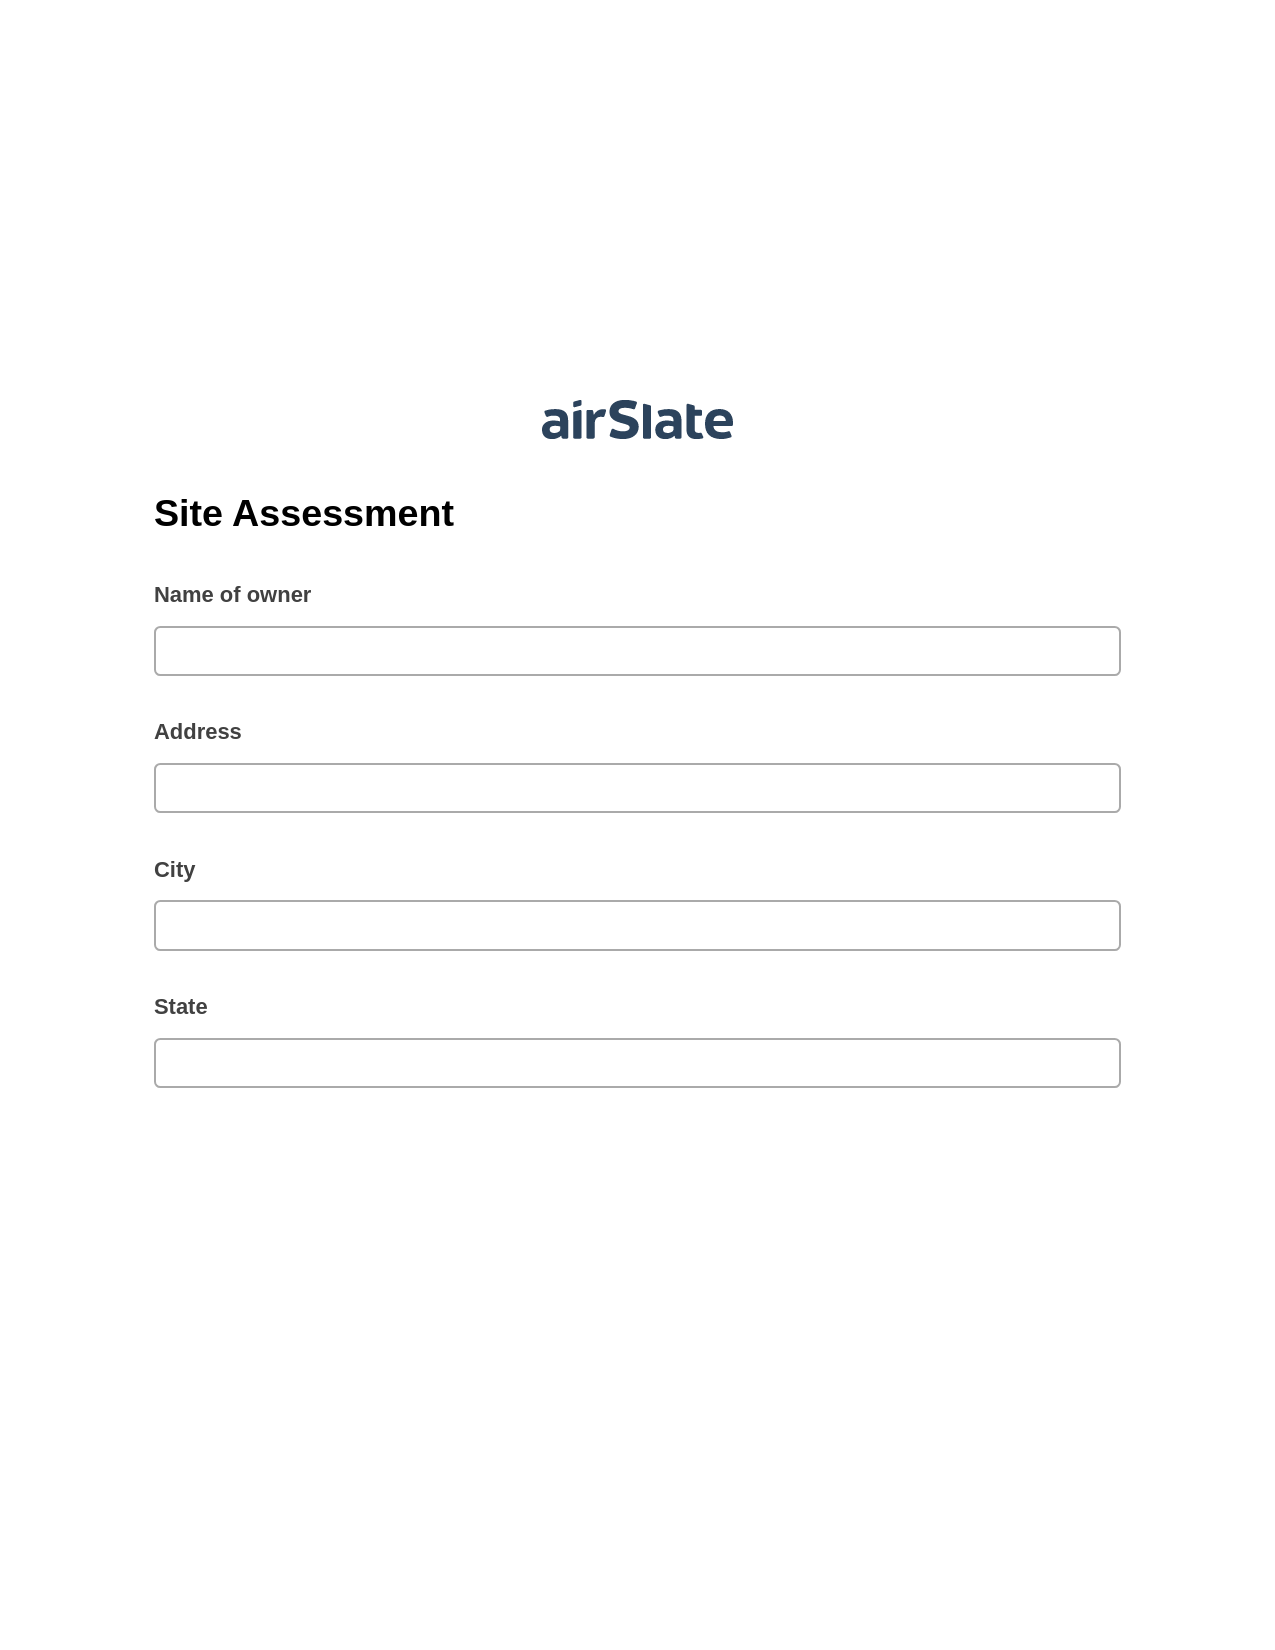 Site Assessment Pre-fill from CSV File Bot, Pre-fill with Custom Data Bot, Dropbox Bot